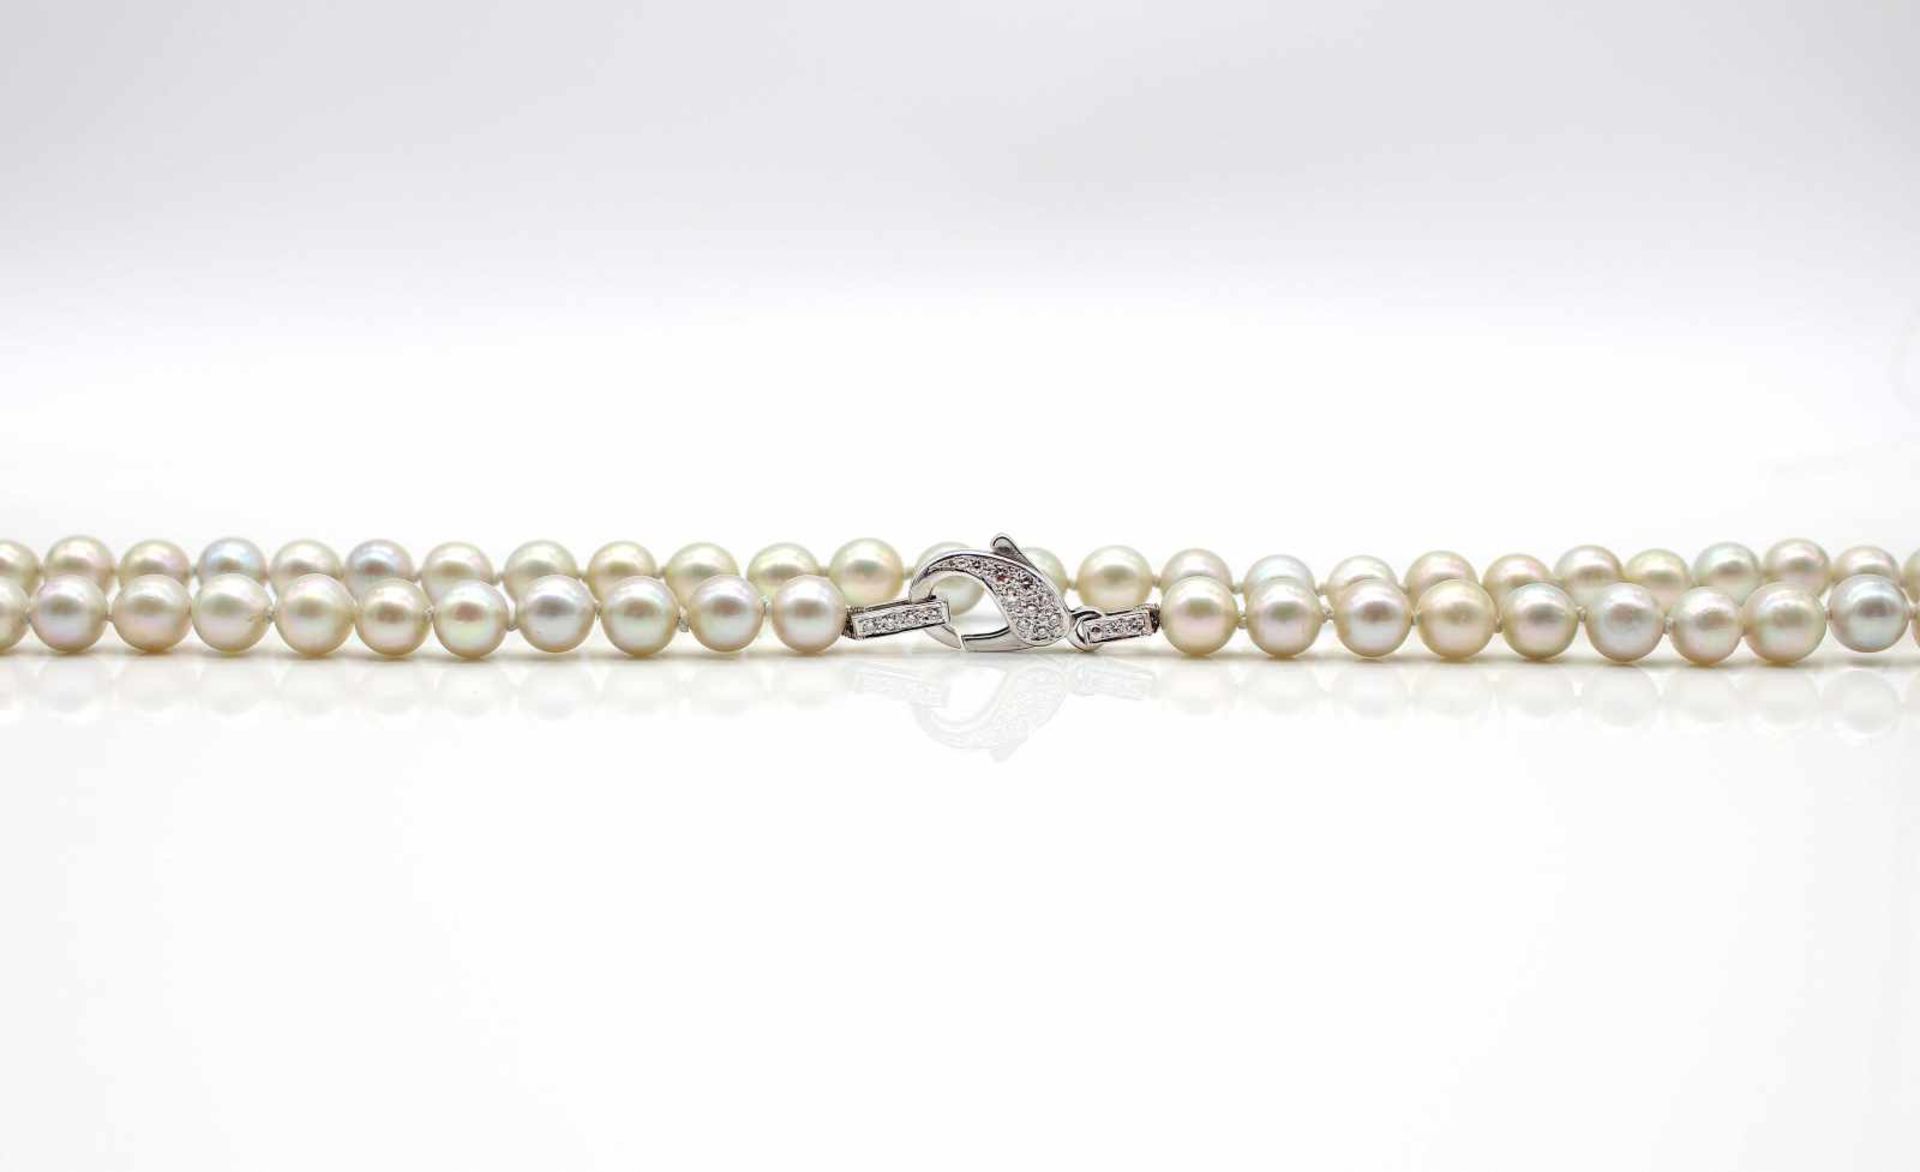 Akoya cultured pearl necklace, diameter 7.0 to 7.4 mm, lock tested on 585 gold with 30 diamonds, - Bild 2 aus 3